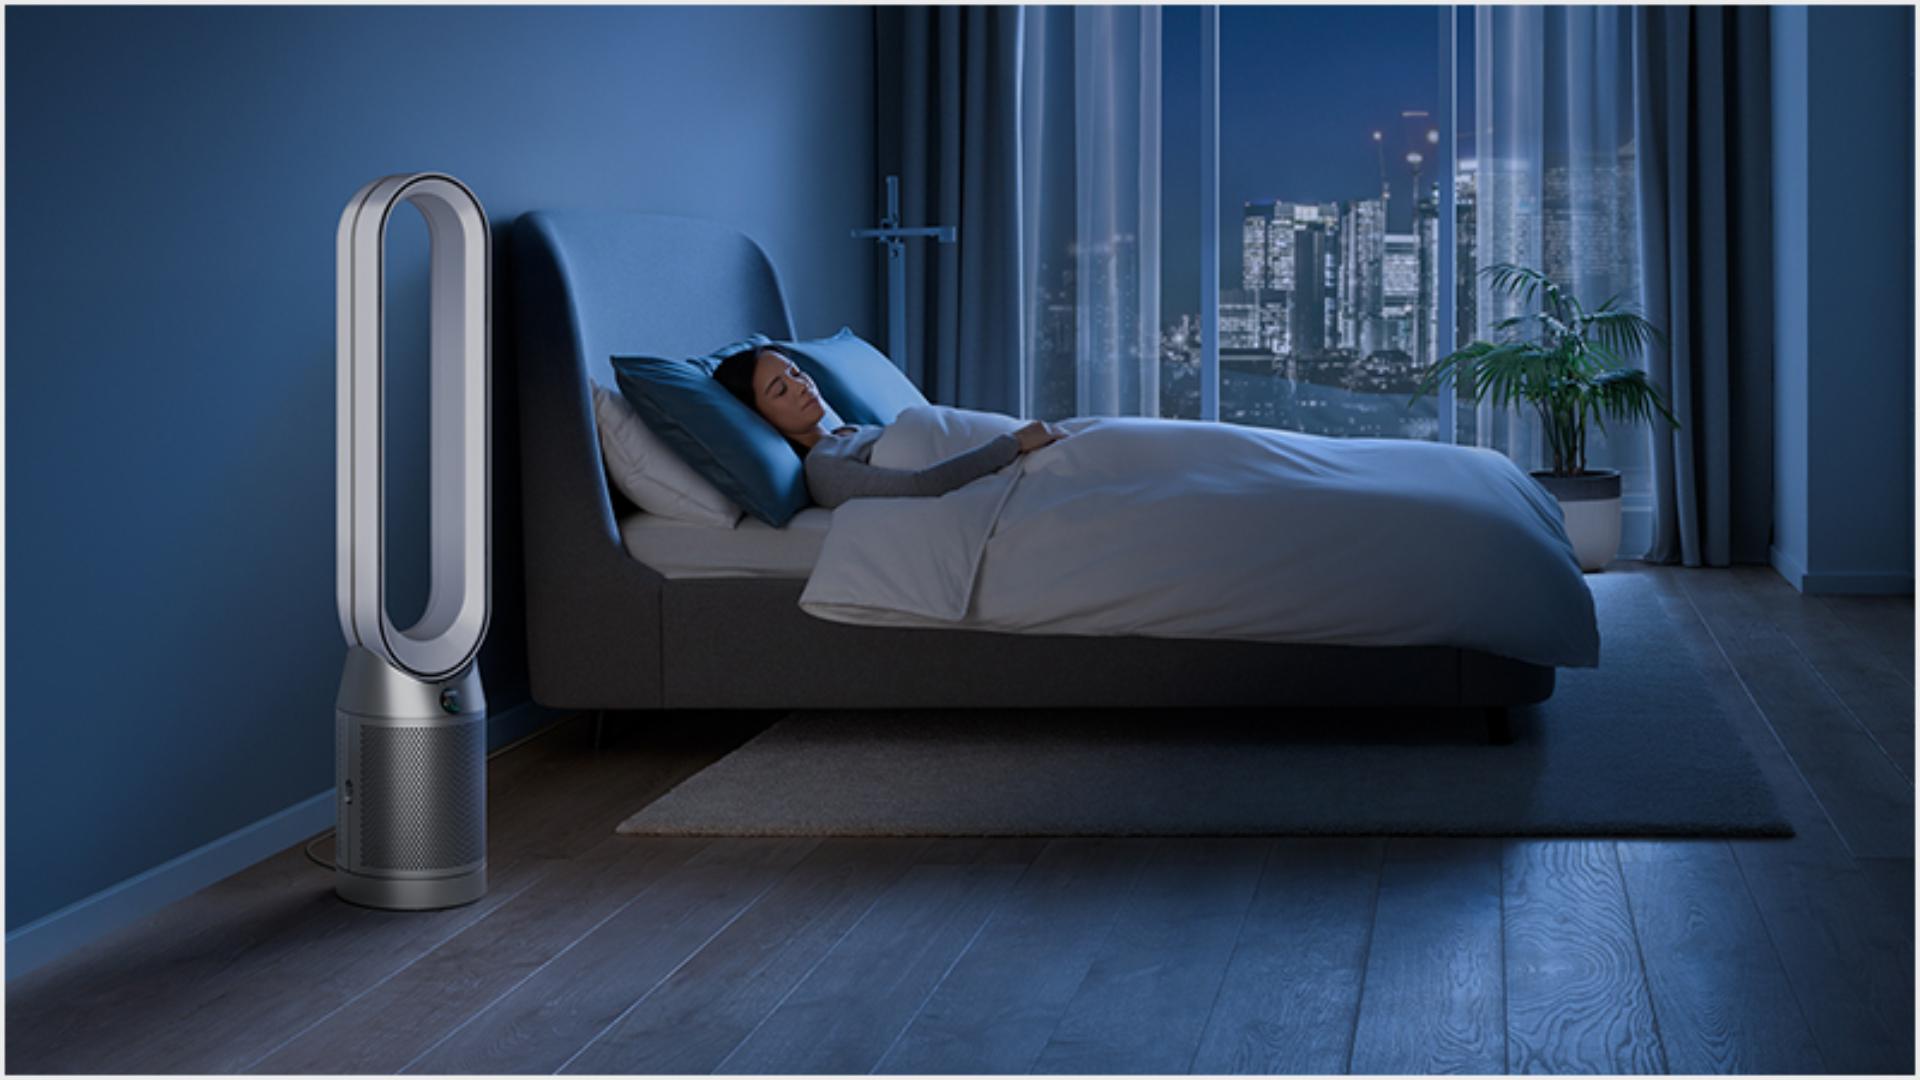 Someone sleeping peacfeully in a hotel room purified by a Dyson purifier